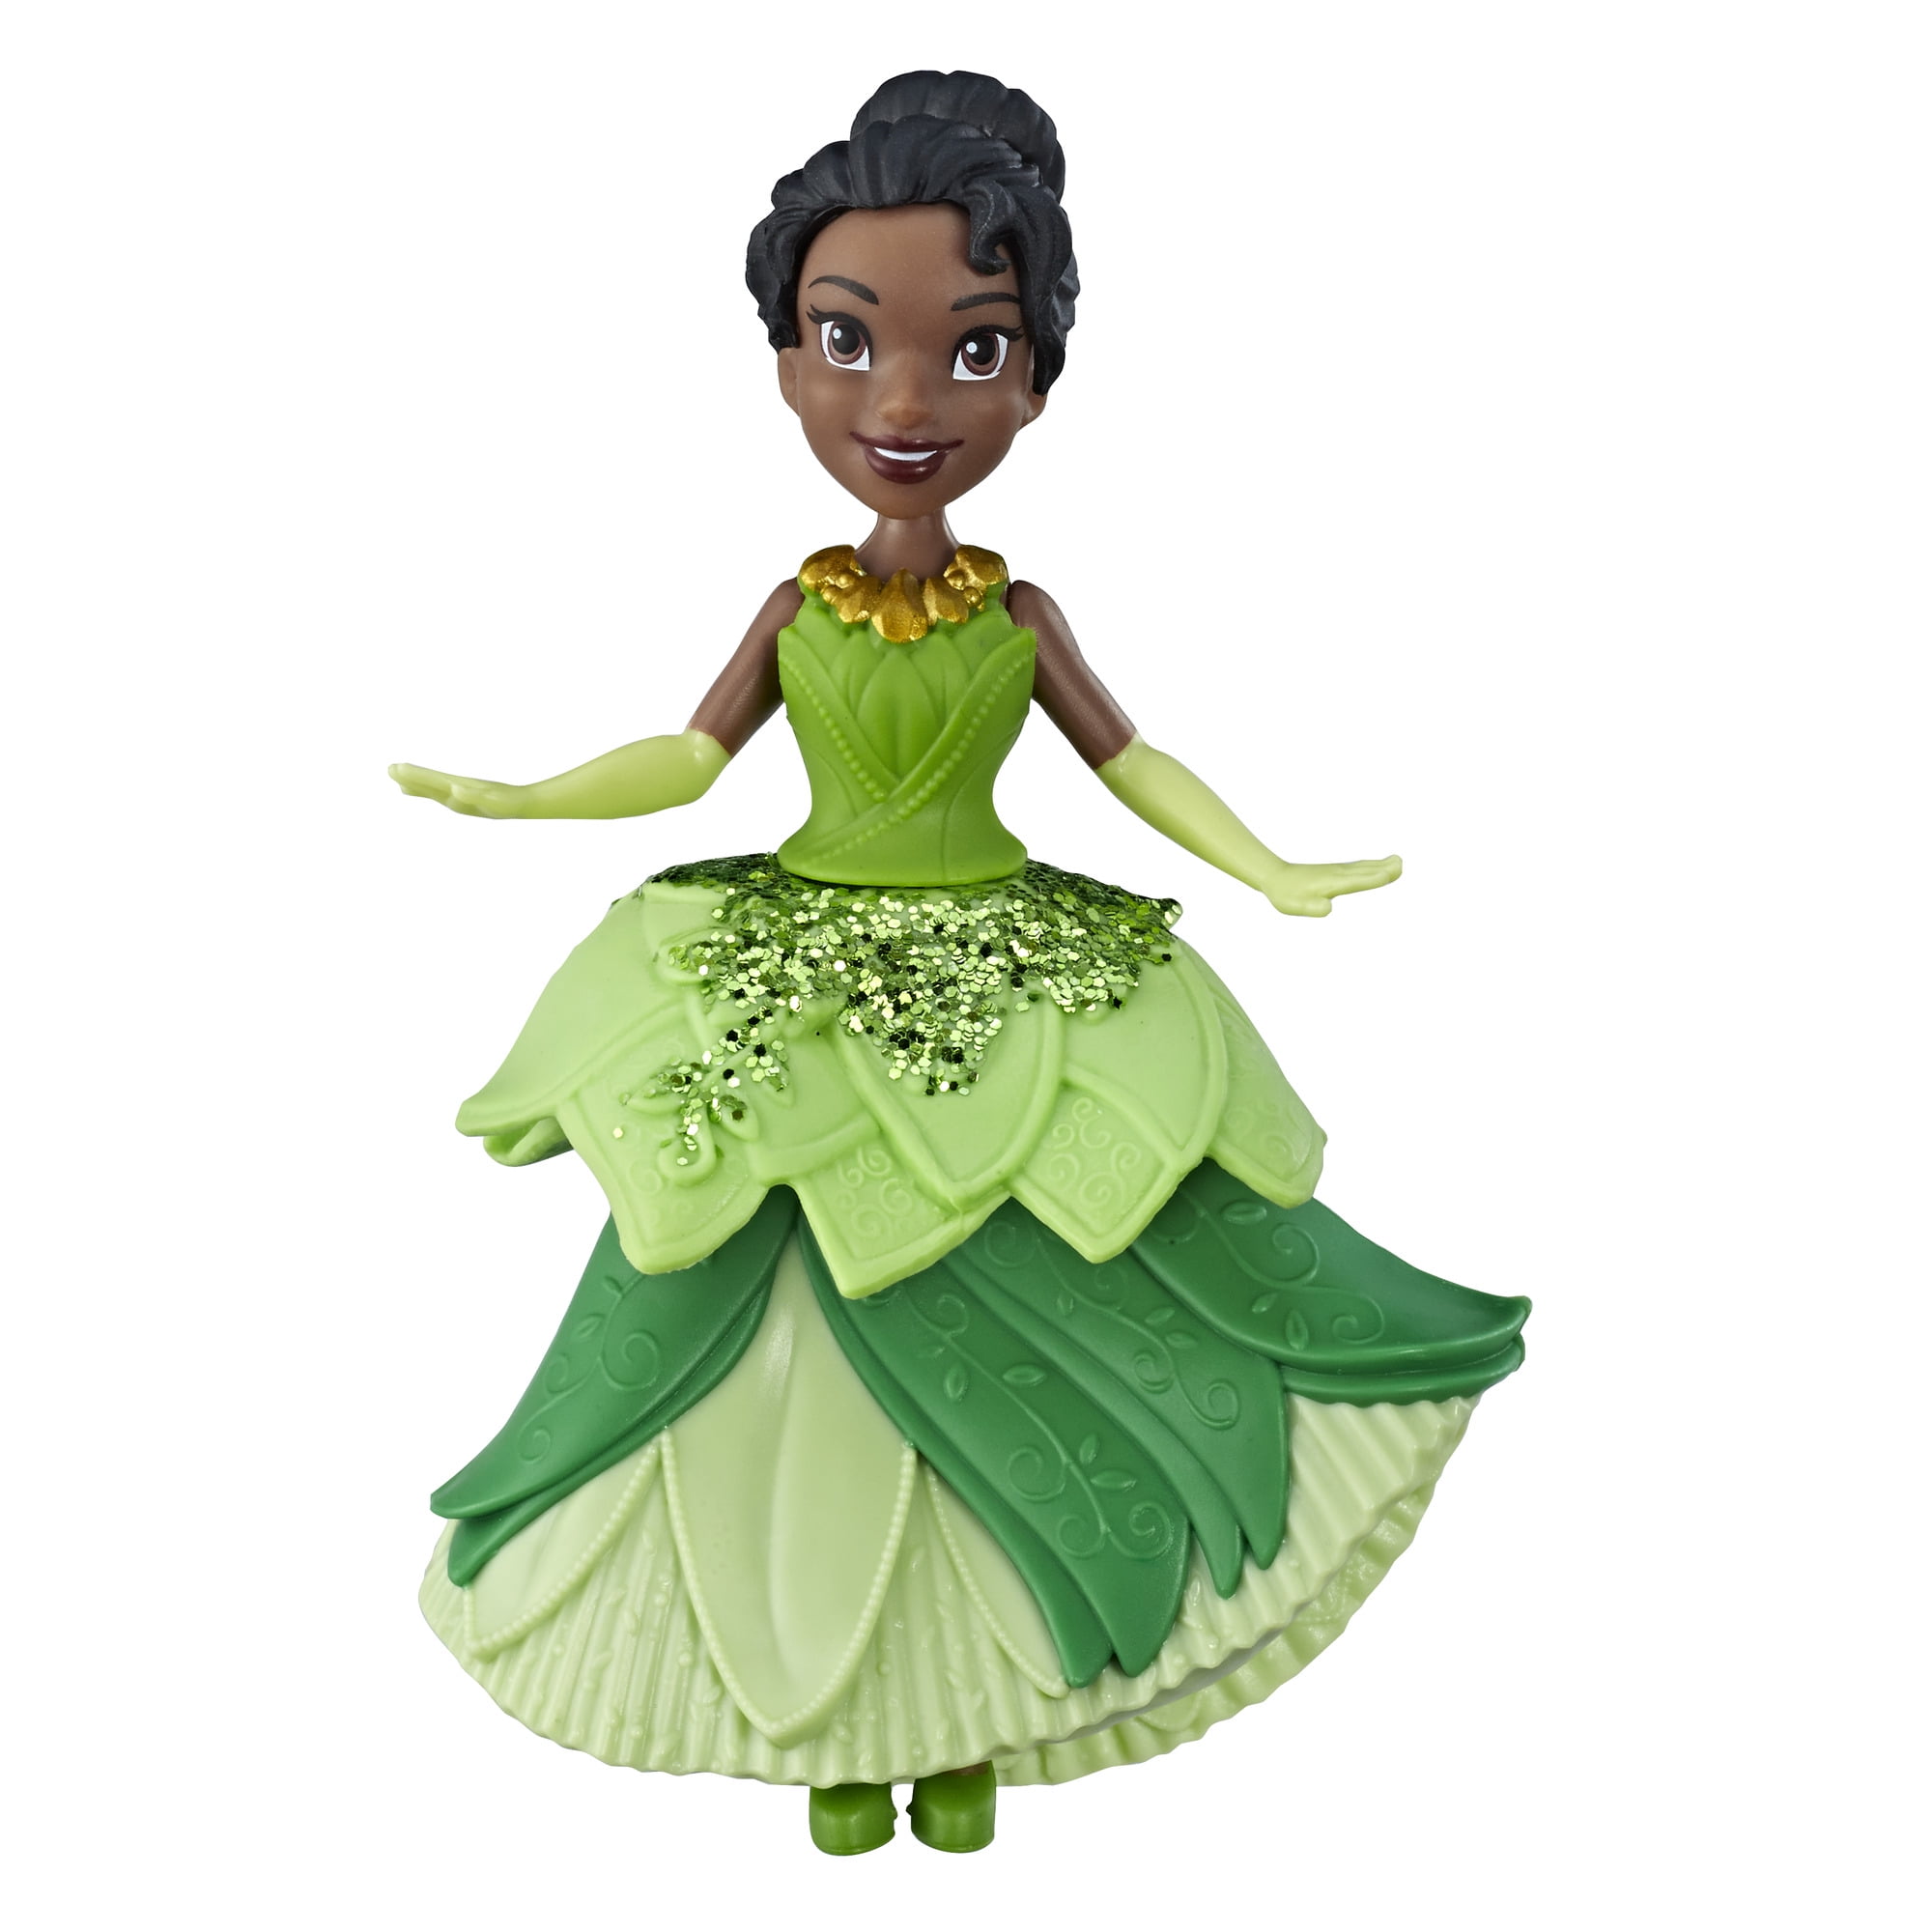 for sale online Disney Princess Tiana Doll 12" Ages 3 6001040901021P 